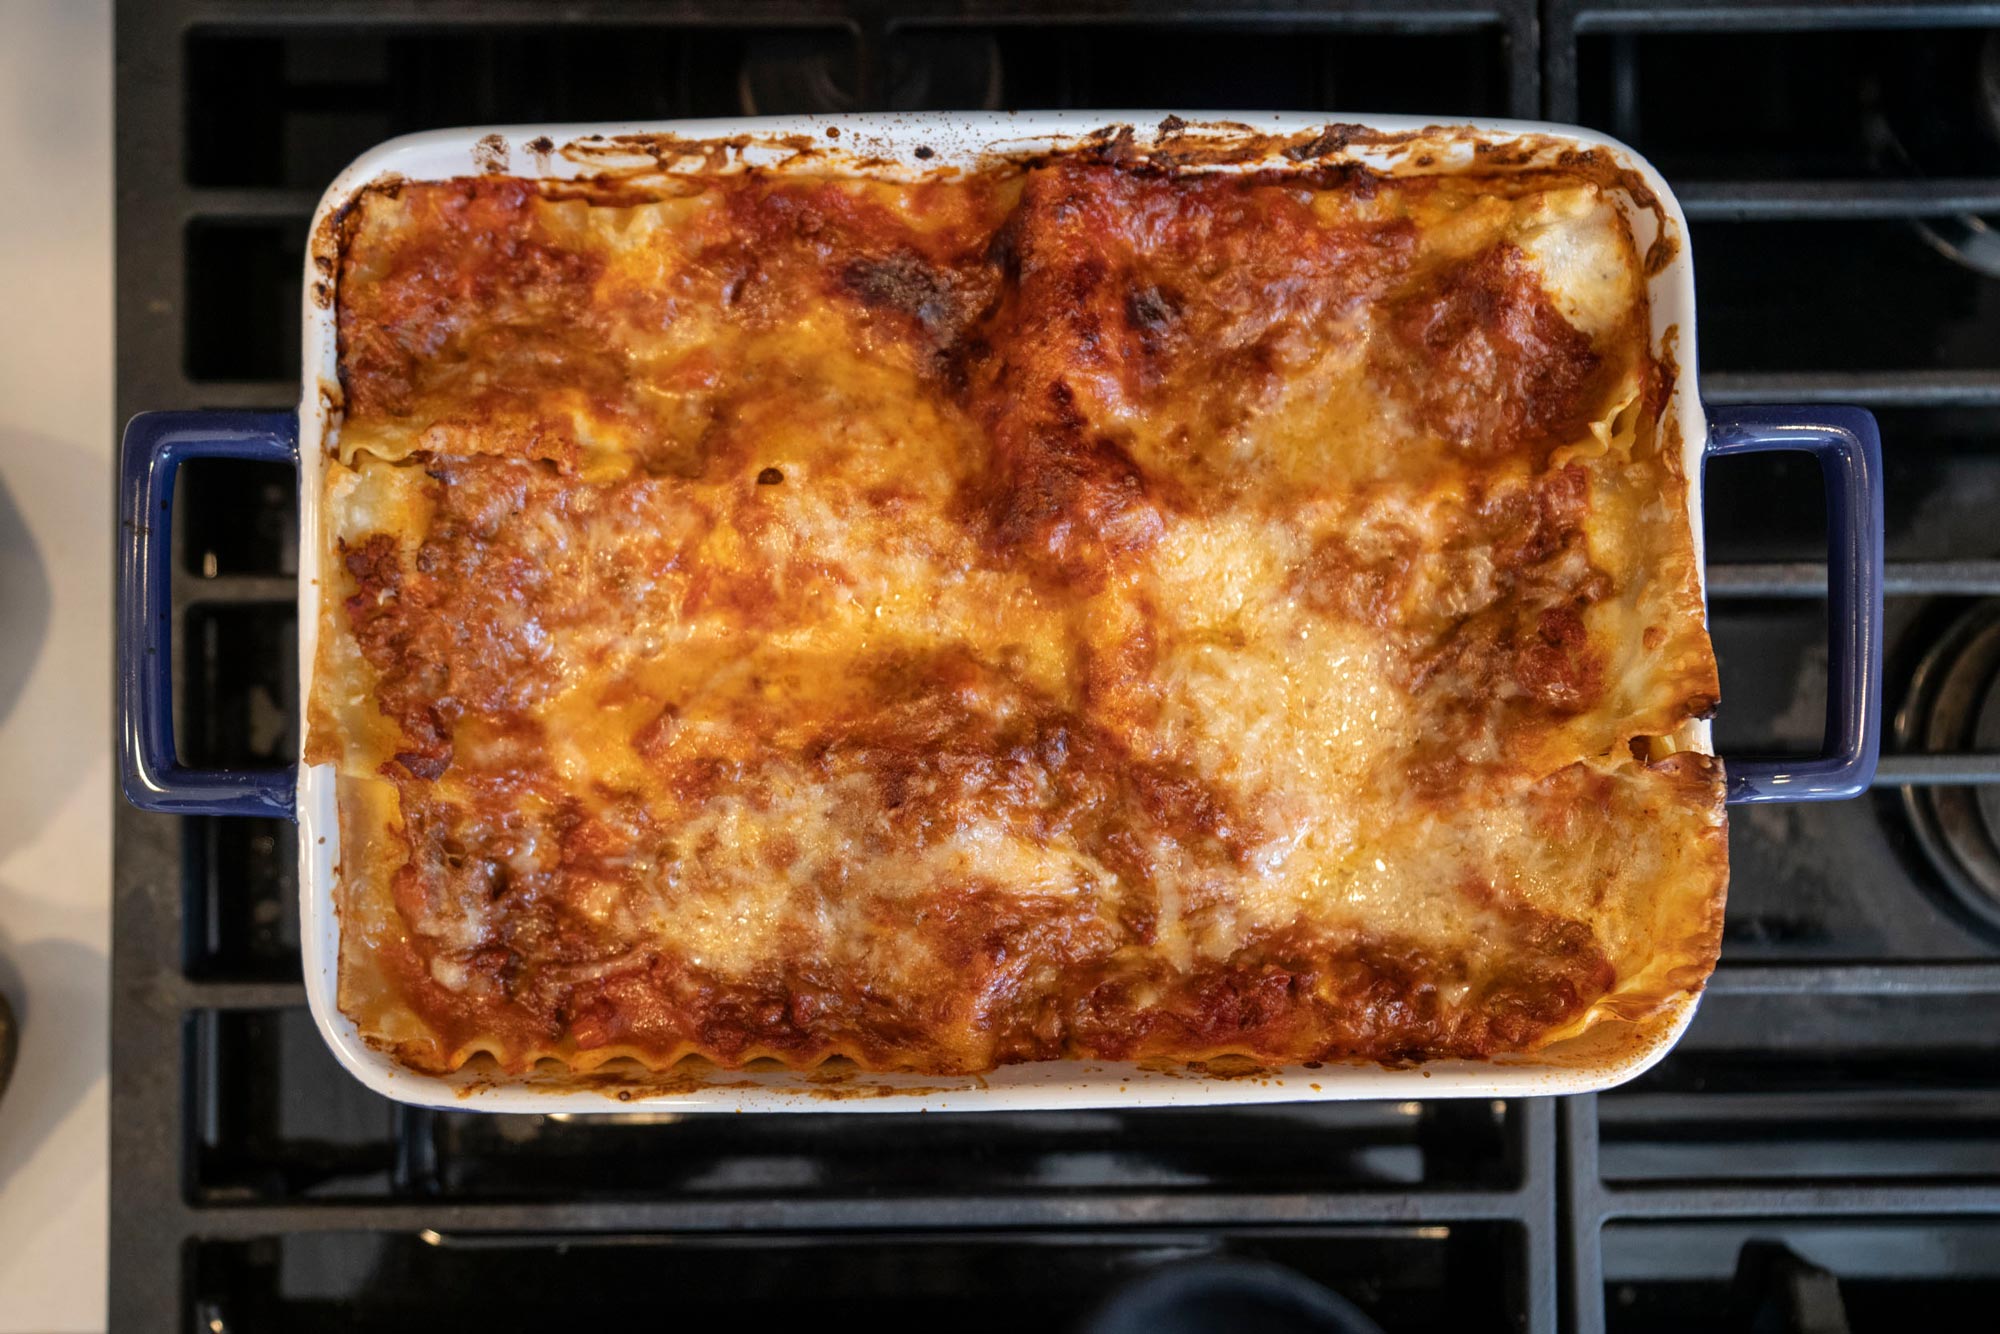 Cooked Lasagna sitting on top of a stove